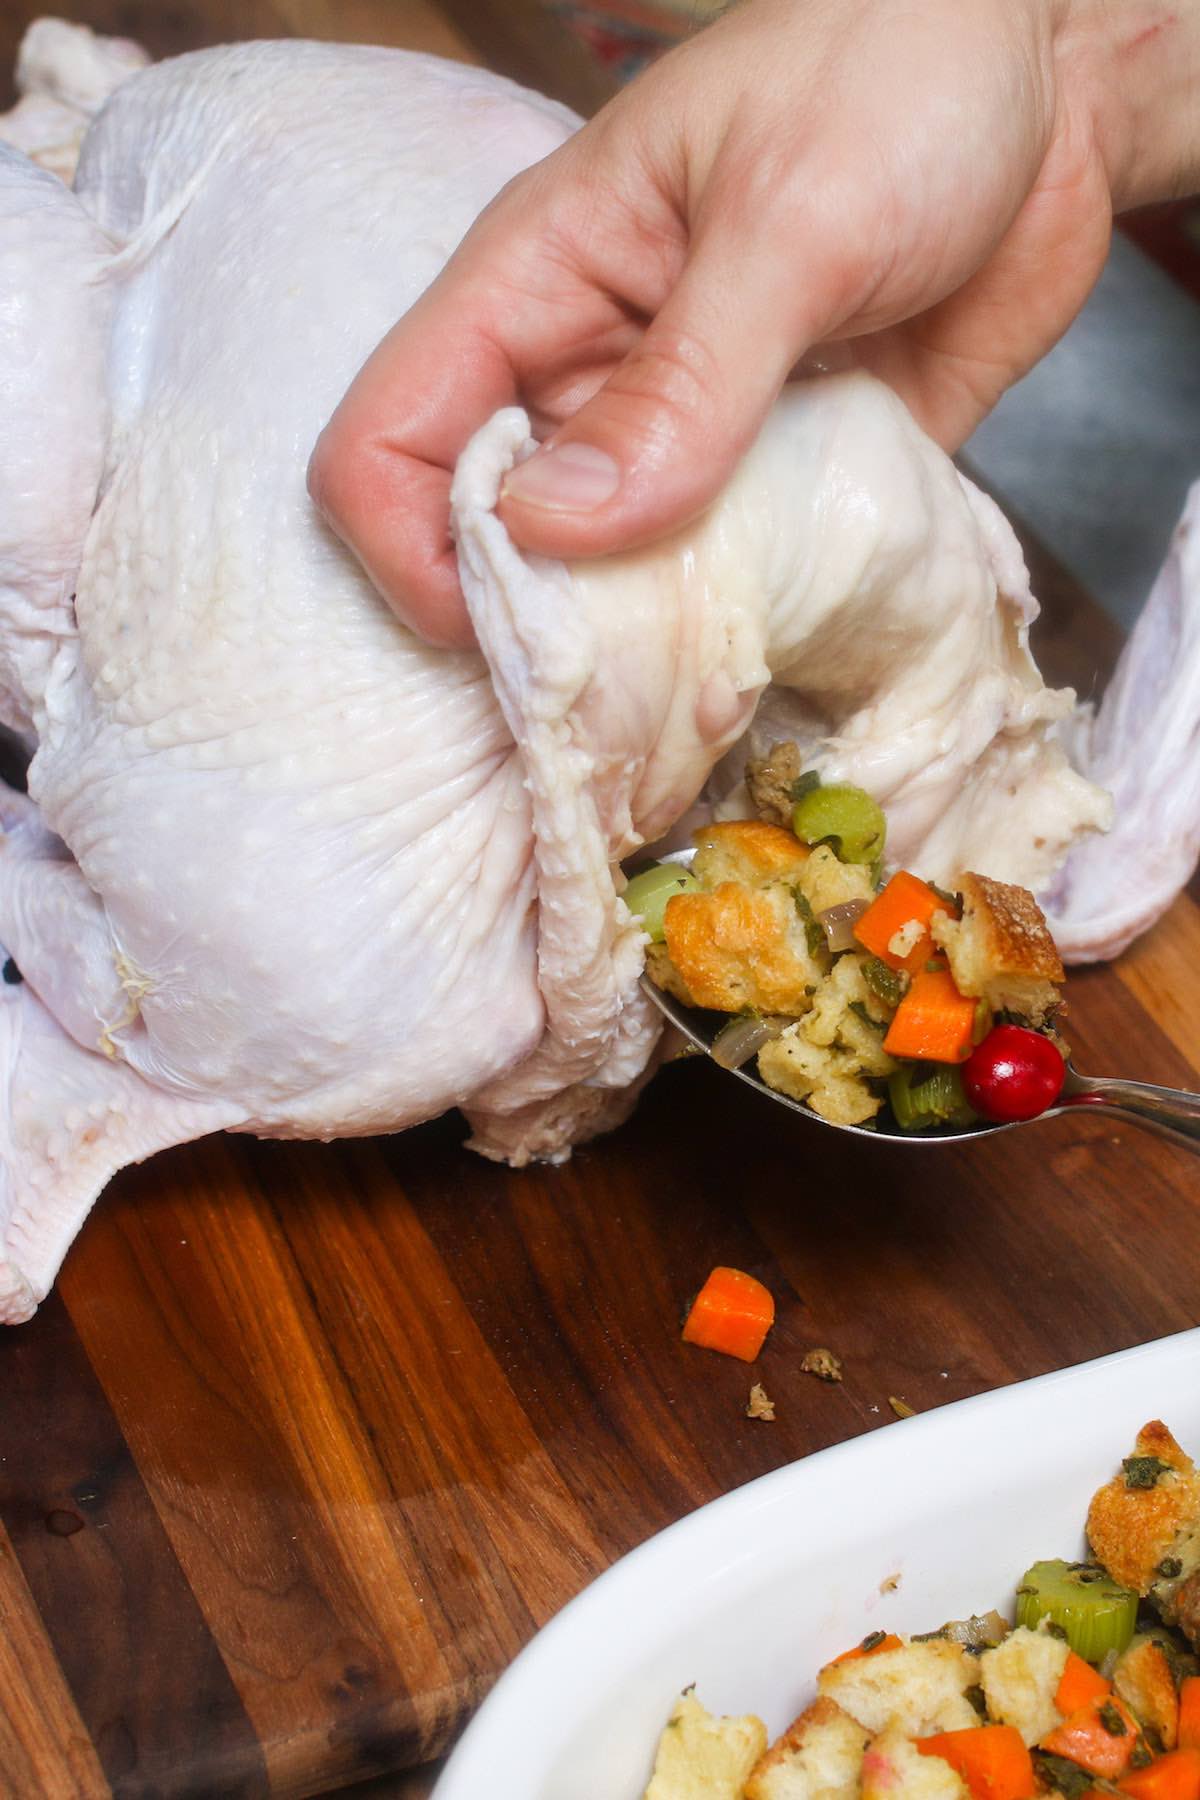 Stuffing a turkey from the neck end by lifting the flap of skin to expose the cavity